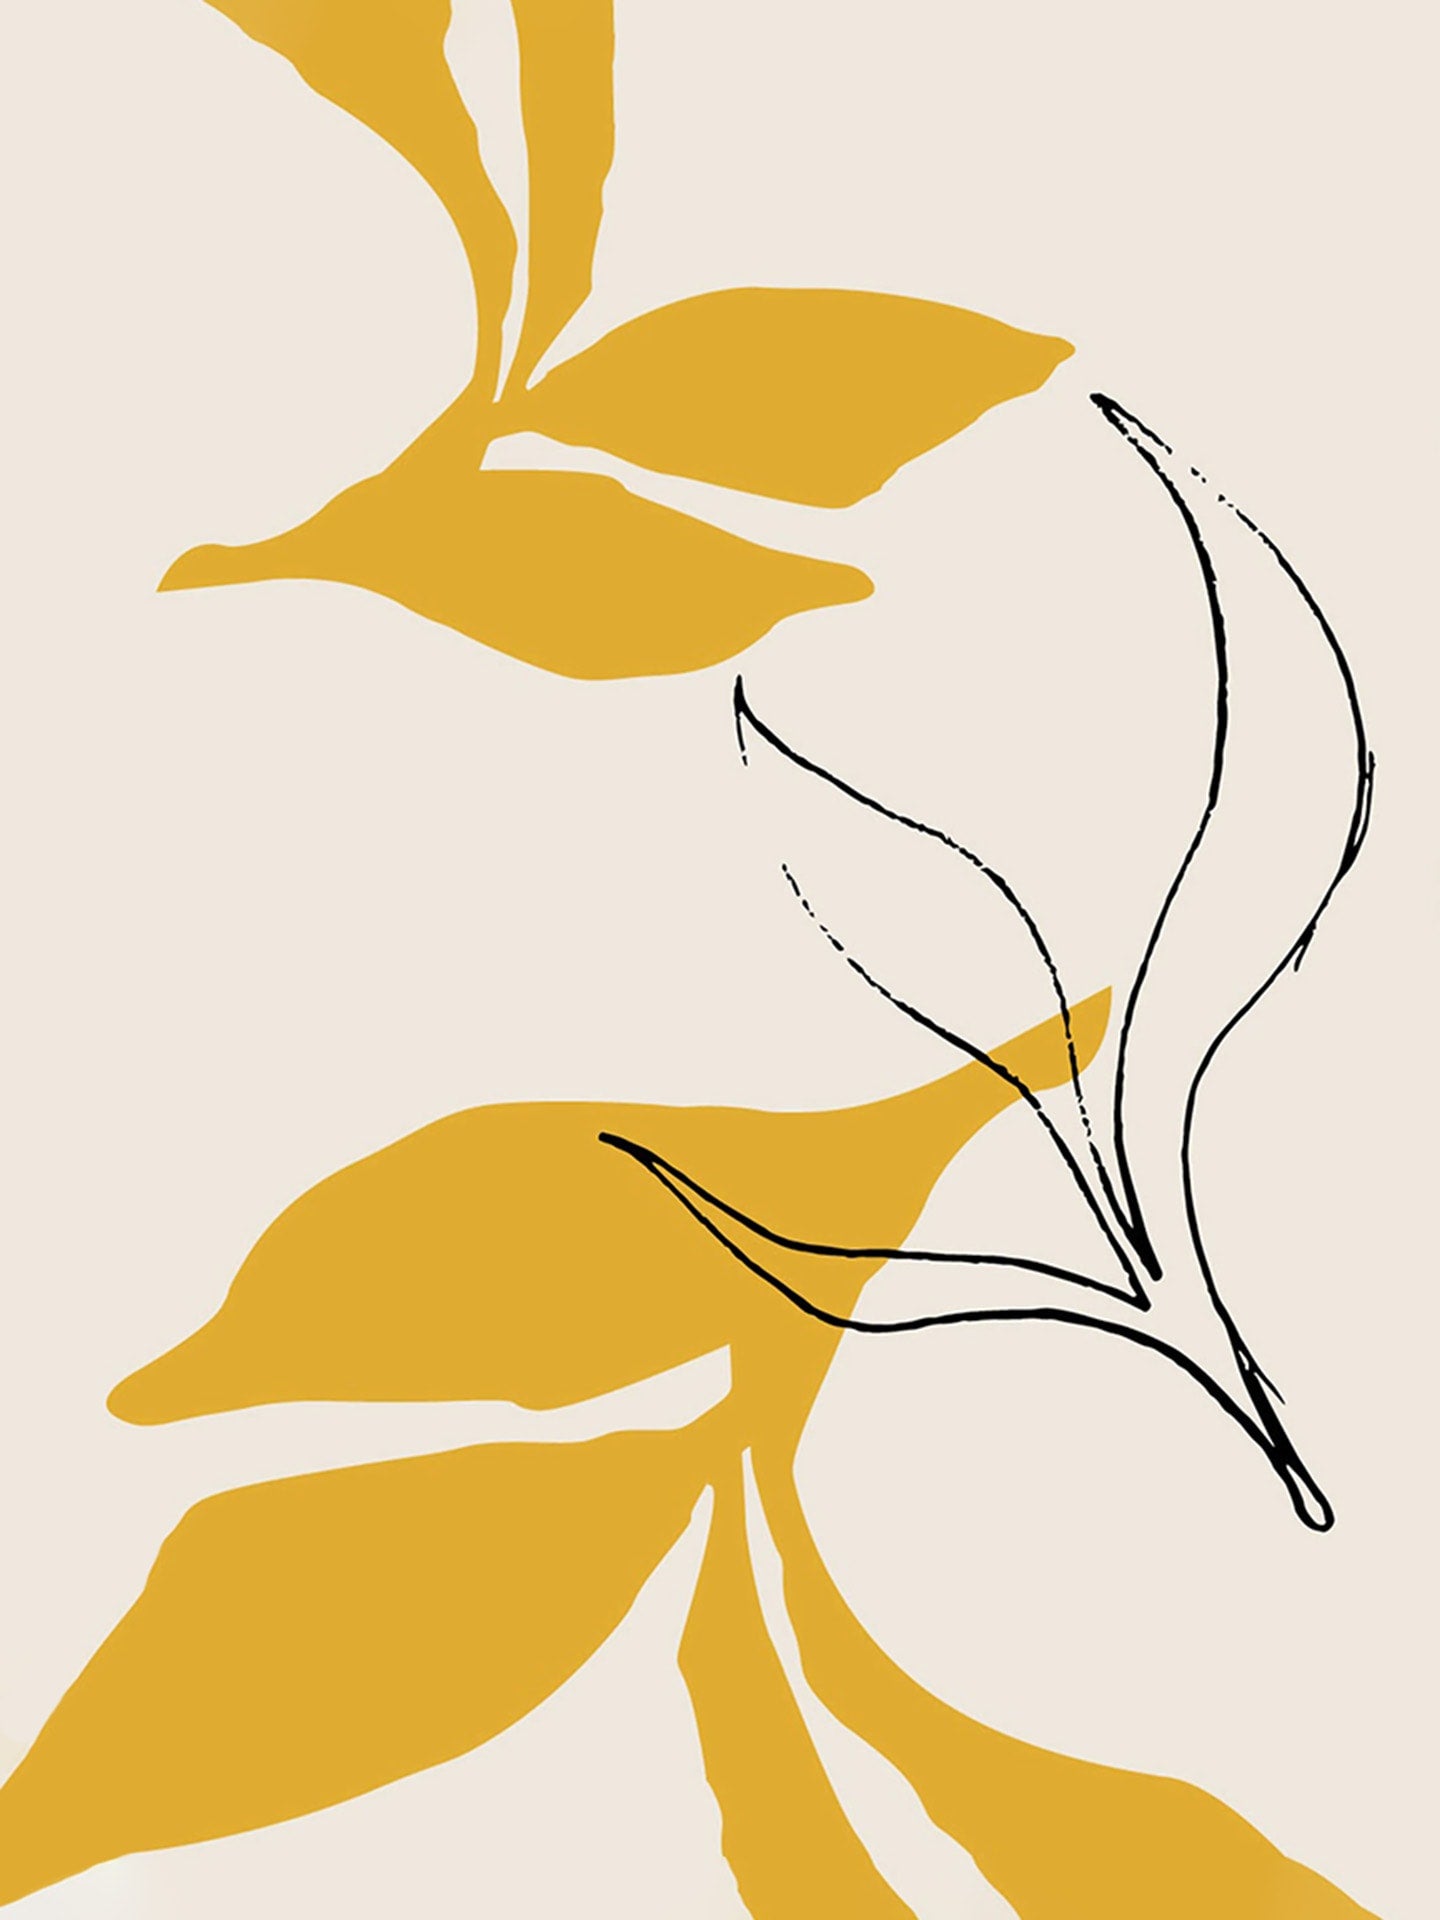 An illustration of a yellow leaf on a beige background.